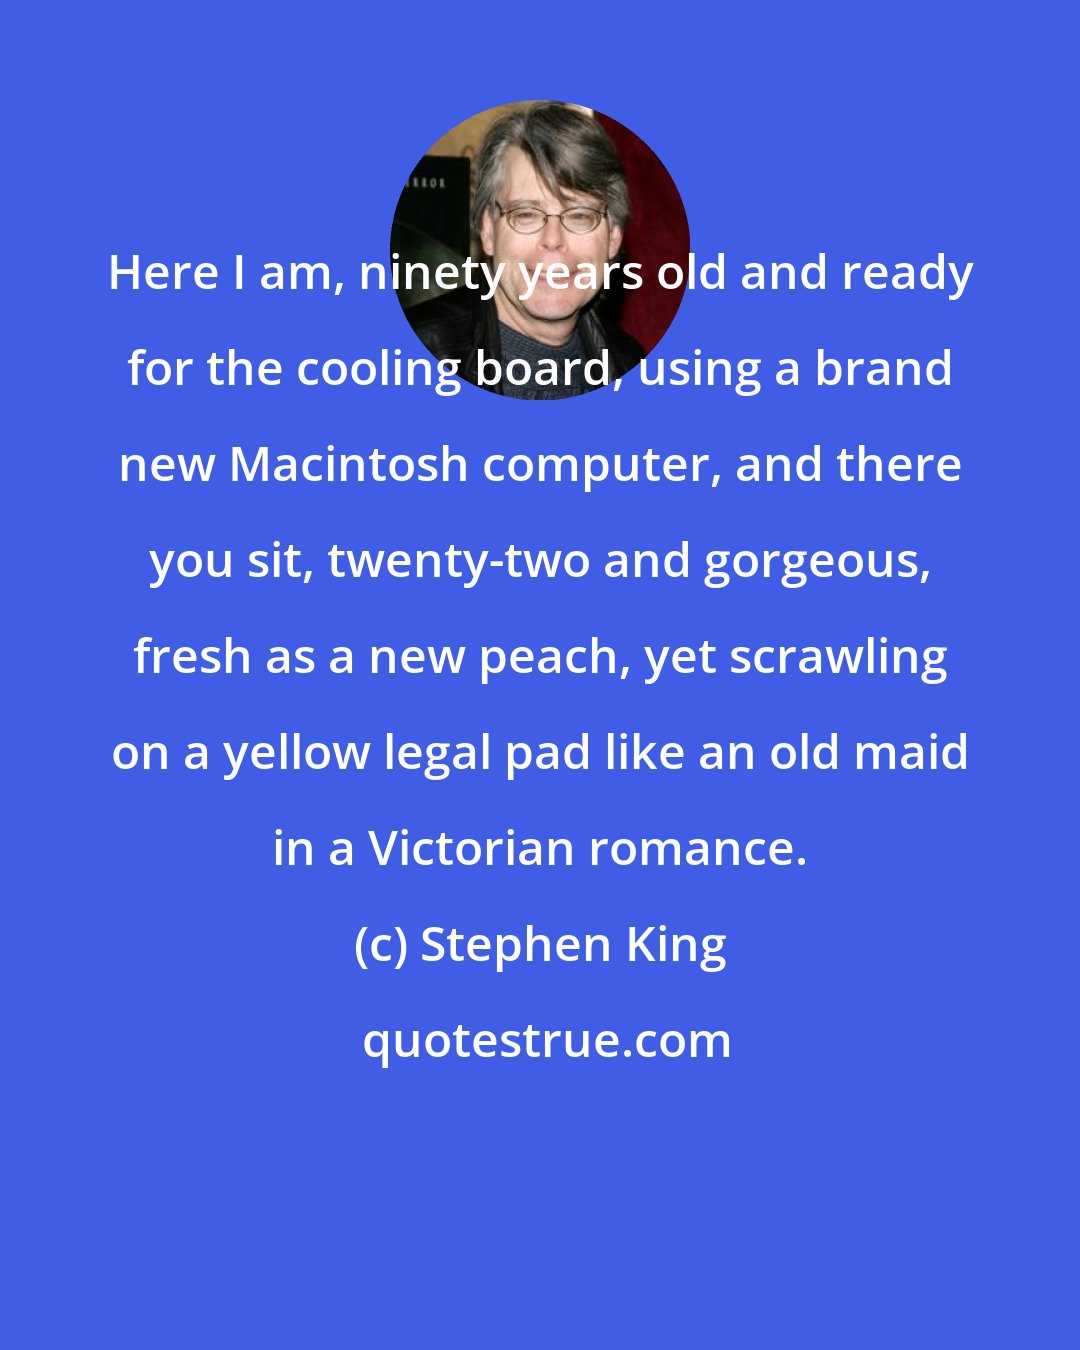 Stephen King: Here I am, ninety years old and ready for the cooling board, using a brand new Macintosh computer, and there you sit, twenty-two and gorgeous, fresh as a new peach, yet scrawling on a yellow legal pad like an old maid in a Victorian romance.